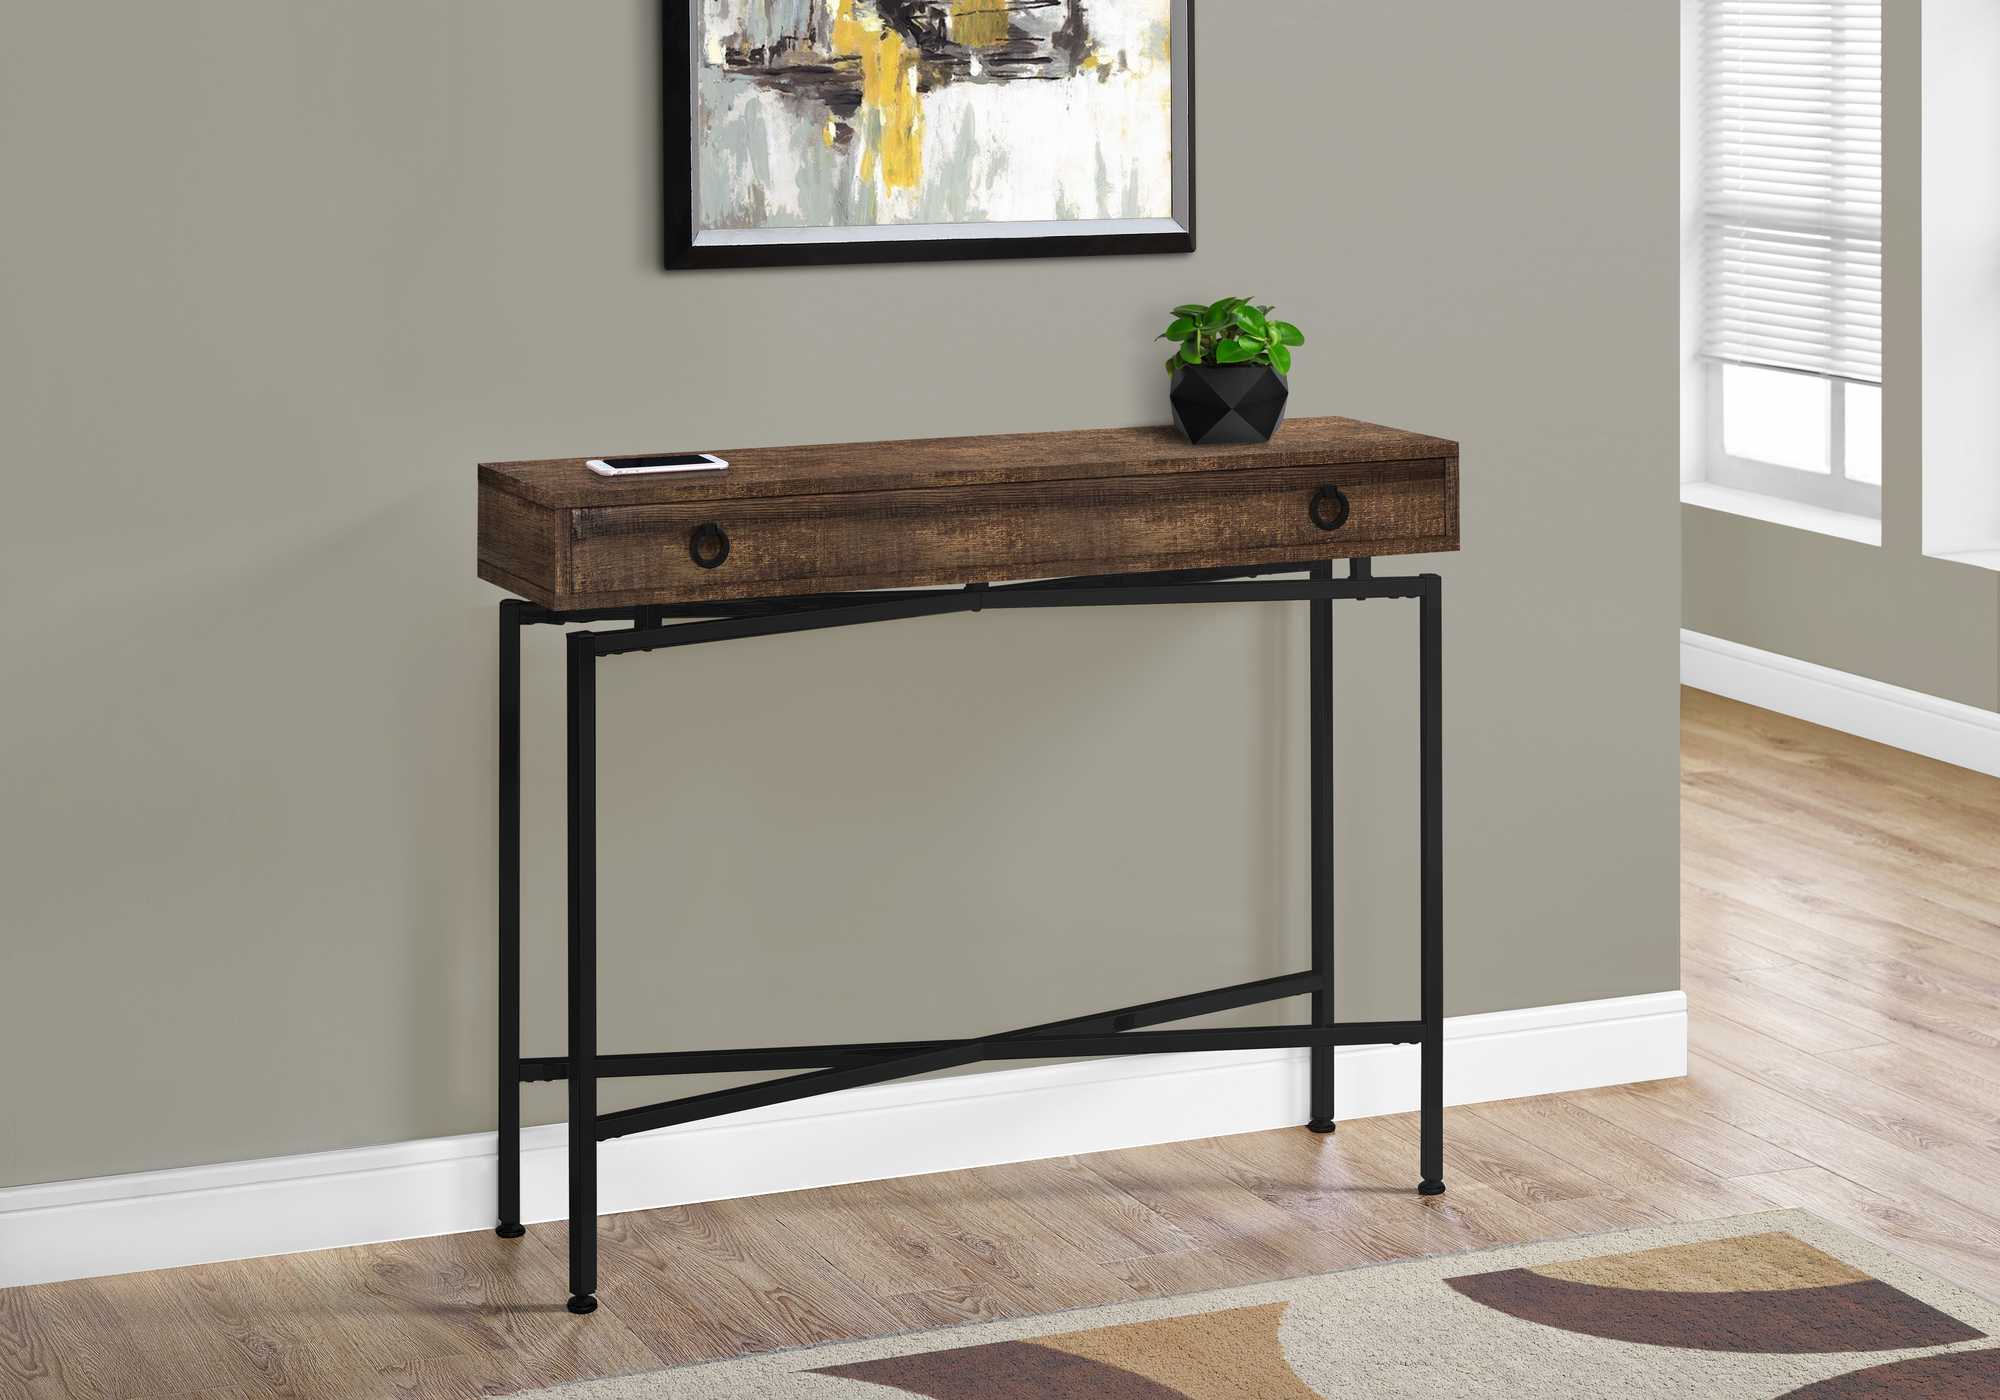 43" Brown And Black Cross Leg Console Table